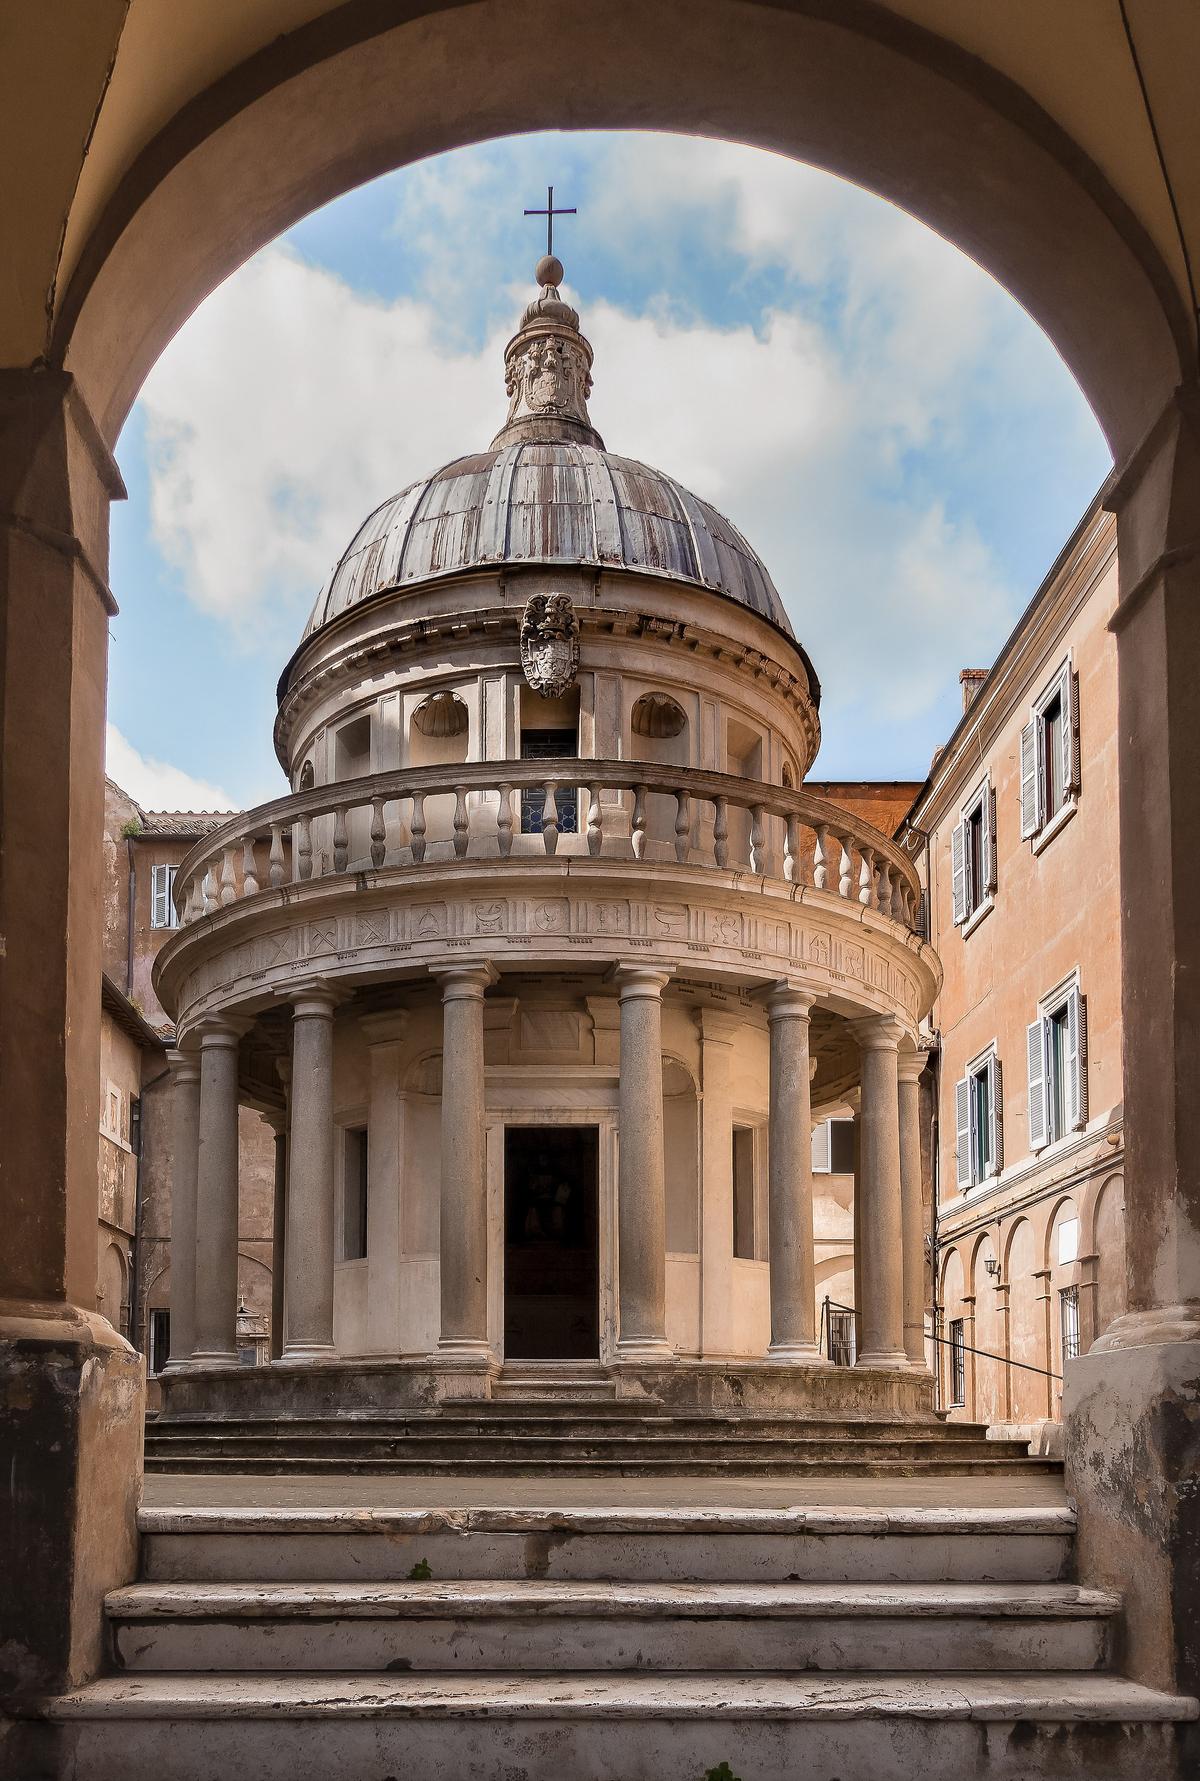 Italian architect Donato Bramante’s Tempietto greets and welcomes those visitors who ascend Janiculum Hill, one of the seven hills of Rome, and pass through the courtyard entrance of the monastery of San Pietro. (Herbert Weber, Hildesheim/CC BY-SA 4.0)